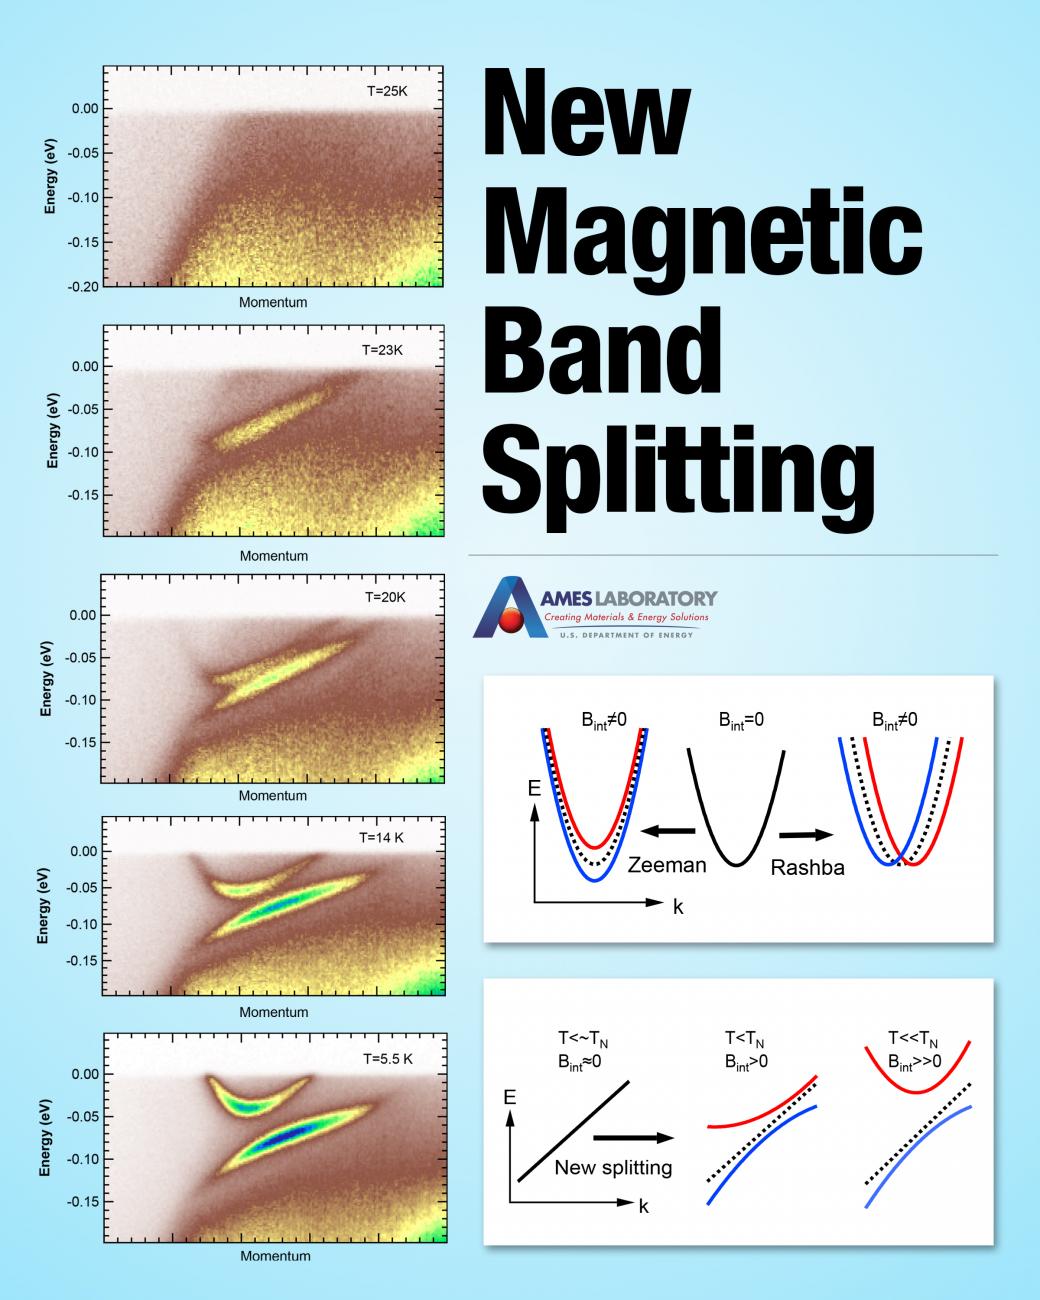 New magnetic band splitting explained with graphics.